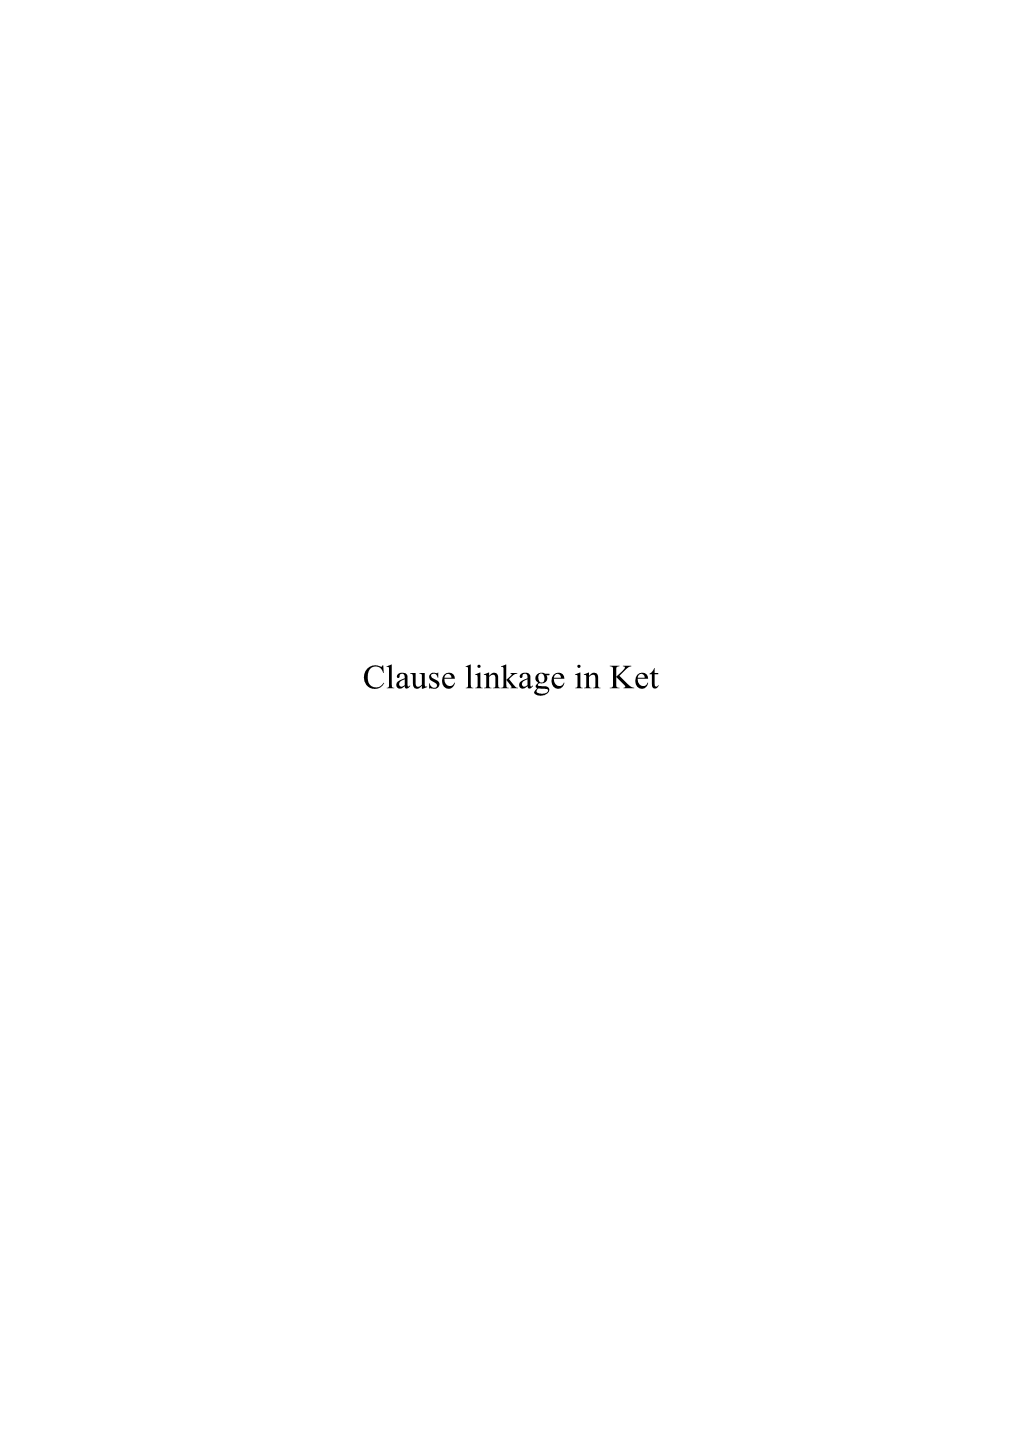 Clause Linkage in Ket